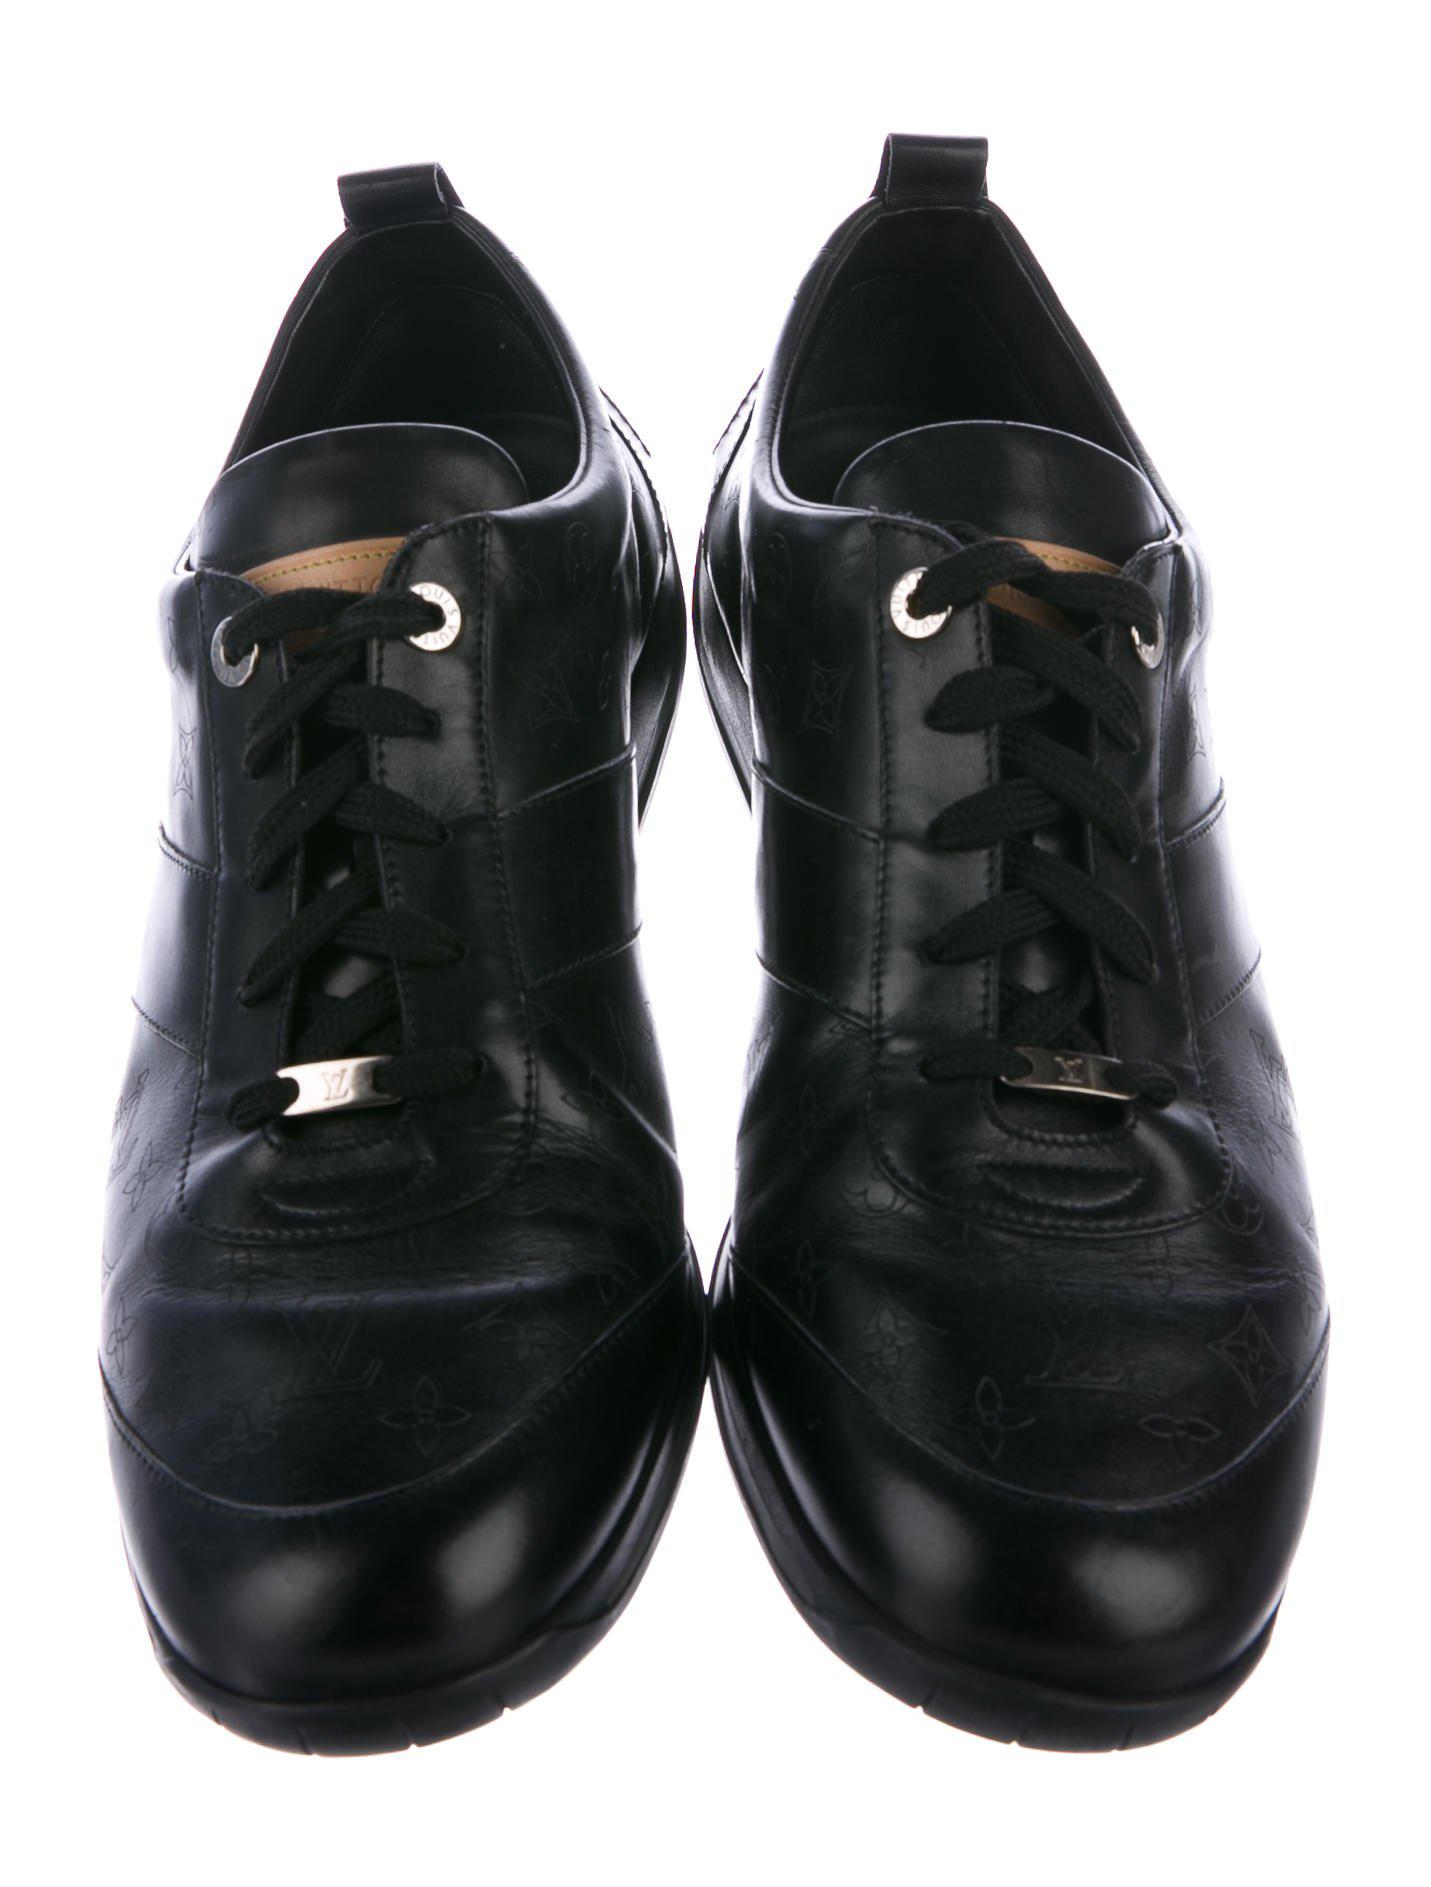 Lyst - Louis Vuitton Monogram Leather Sneakers in Black for Men